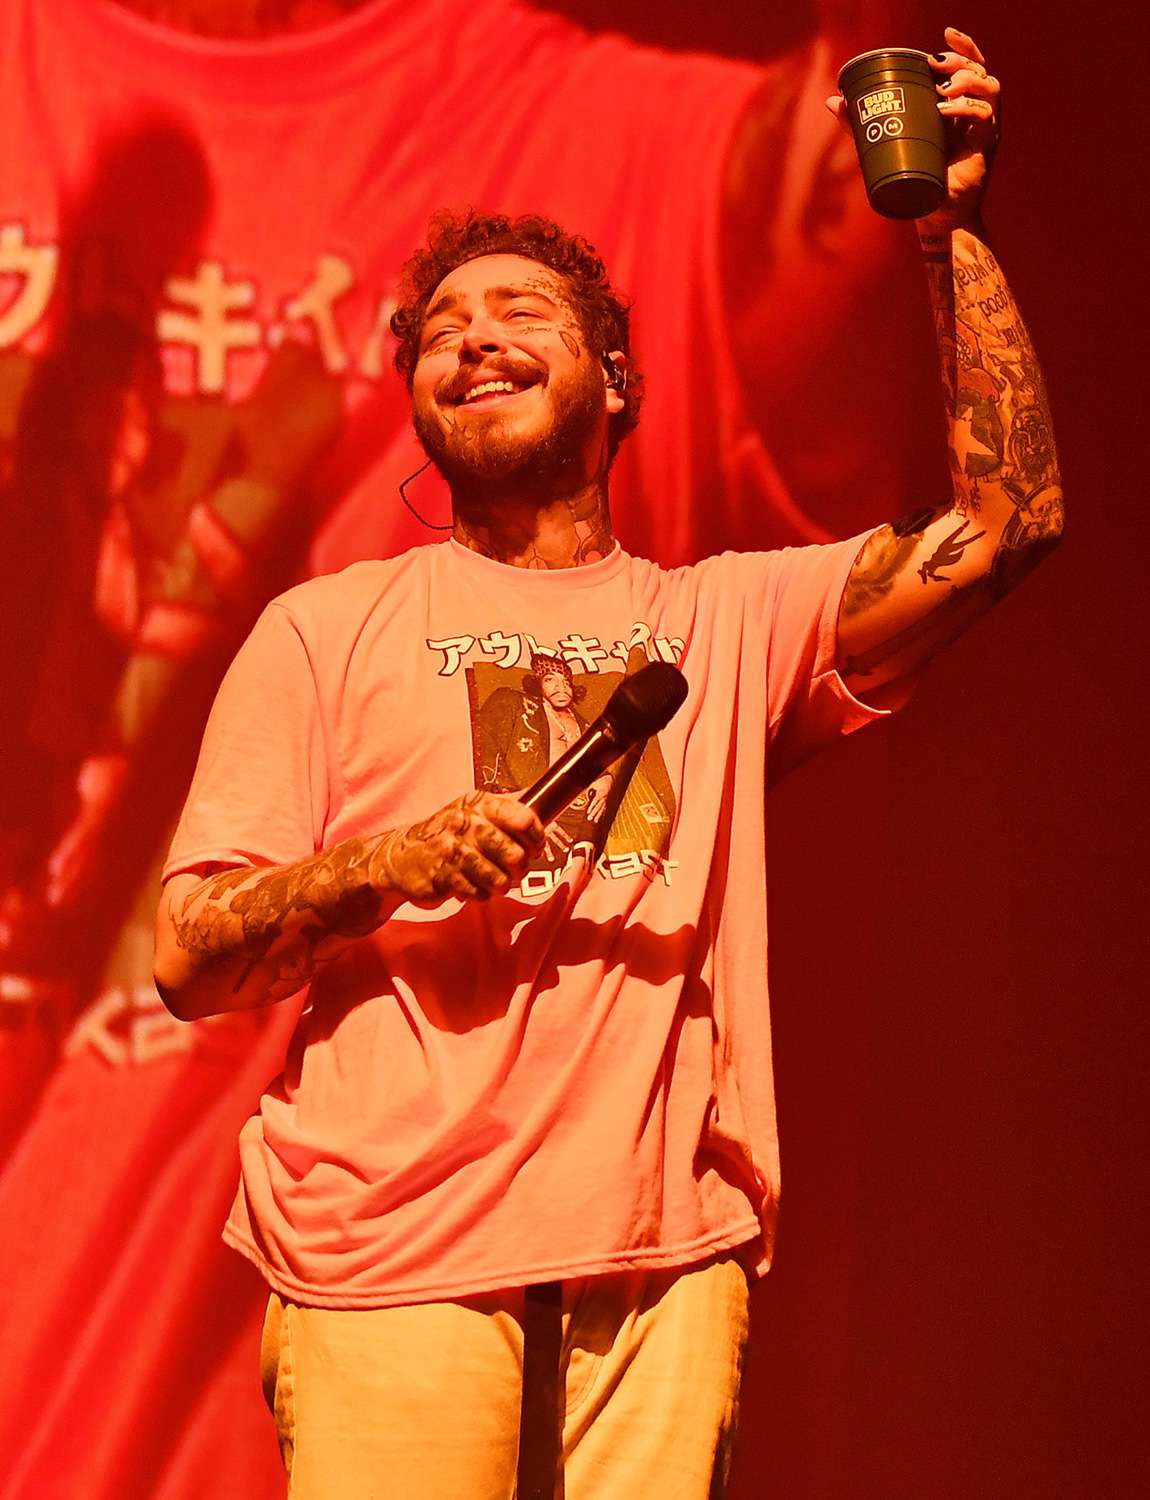 Post Malone performs in concert during his "Runaway" tour at Infinite Energy Center on March 03, 2020 in Duluth, Georgia